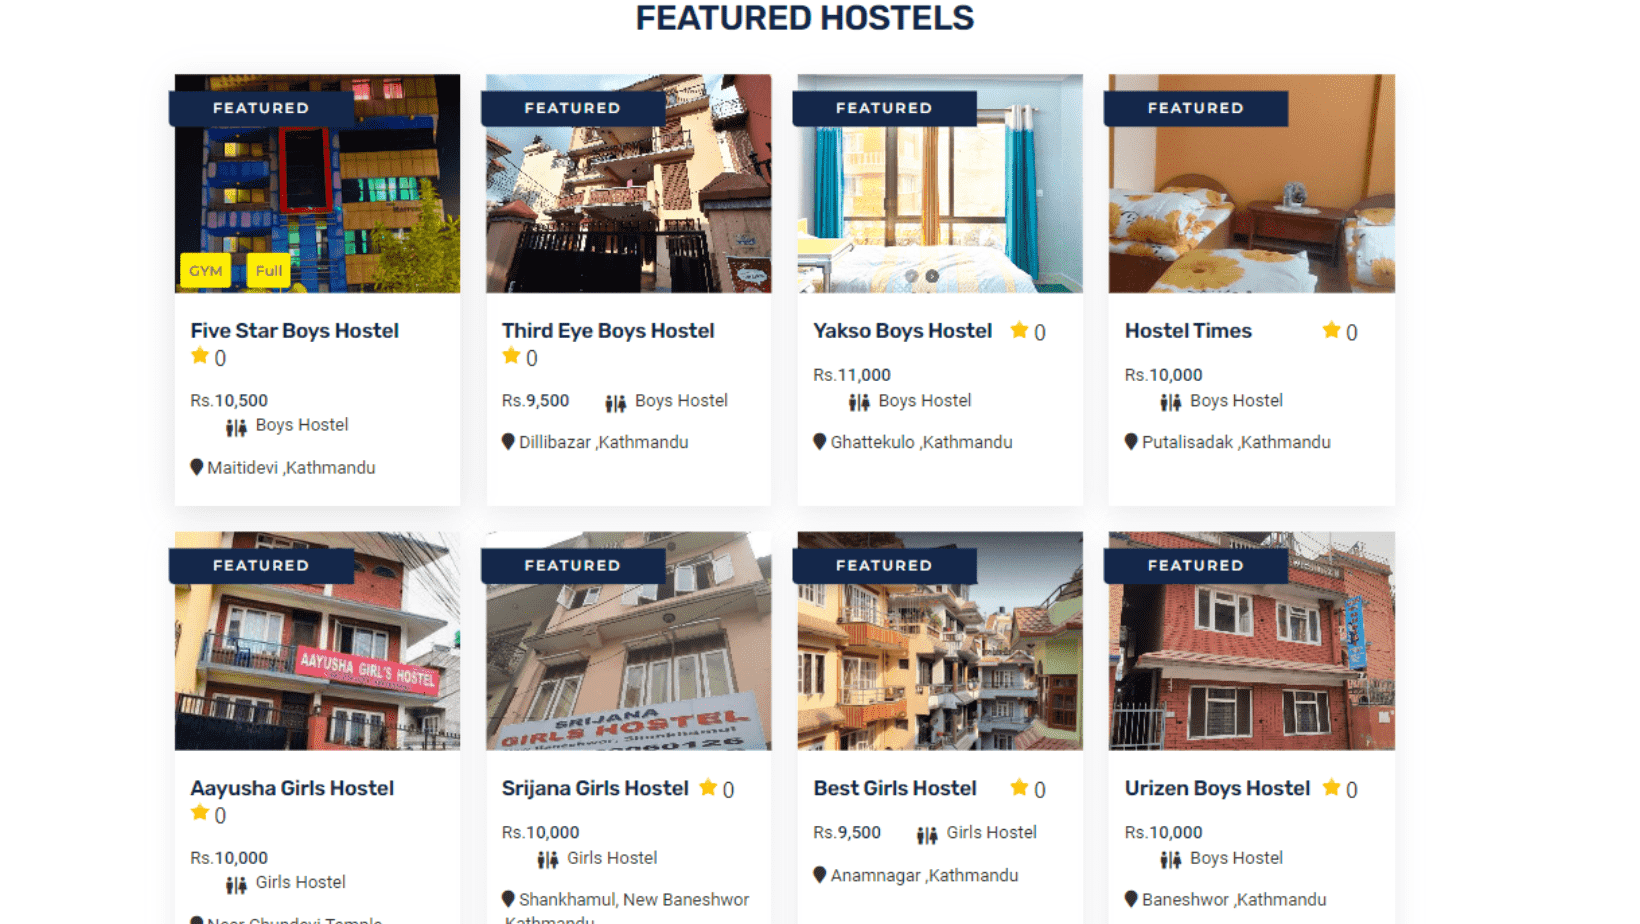 The Ultimate Guide to Finding the Best Hostel in Kathmandu for Students